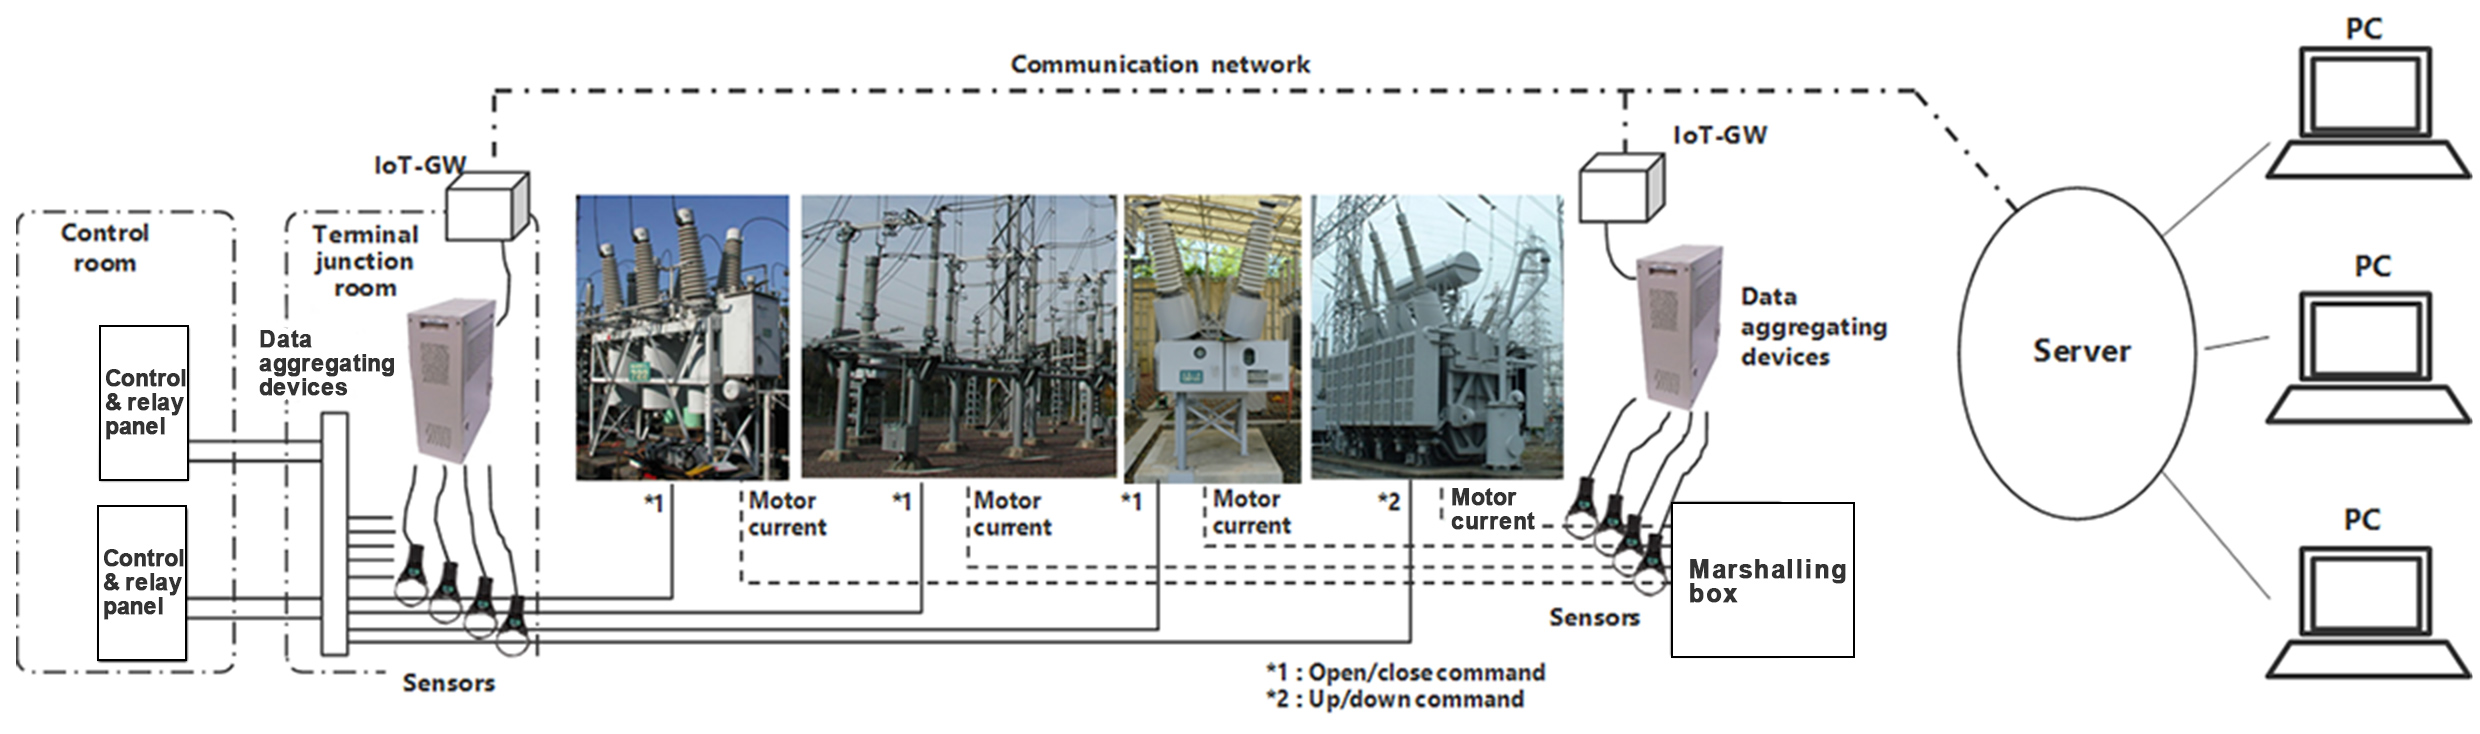 Judgment of Maintenance Timing by Sensing Substation Equipment Condition Remotely